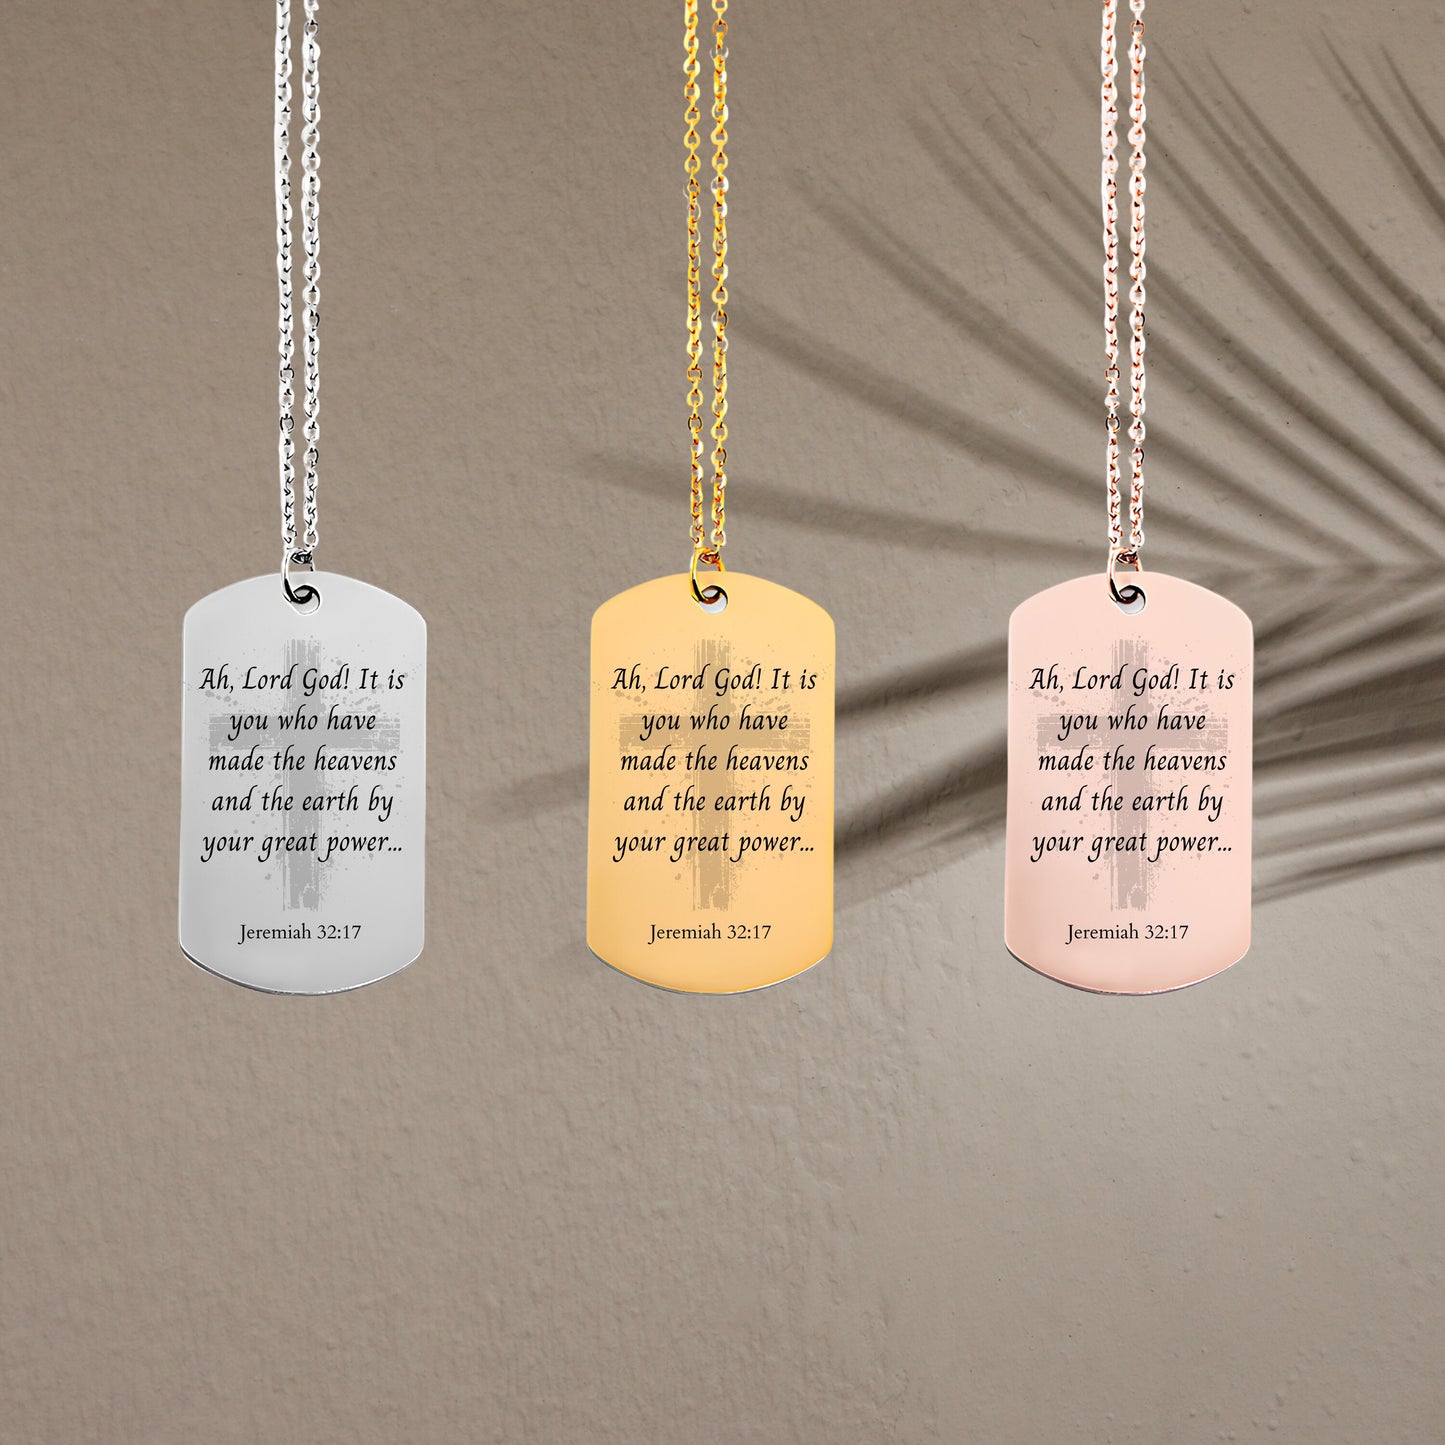 Jeremiah 32 17 quote necklace, gold bible verse, 14k gold cross charm necklace, confirmation gift, gold bar tag necklace,religious scripture